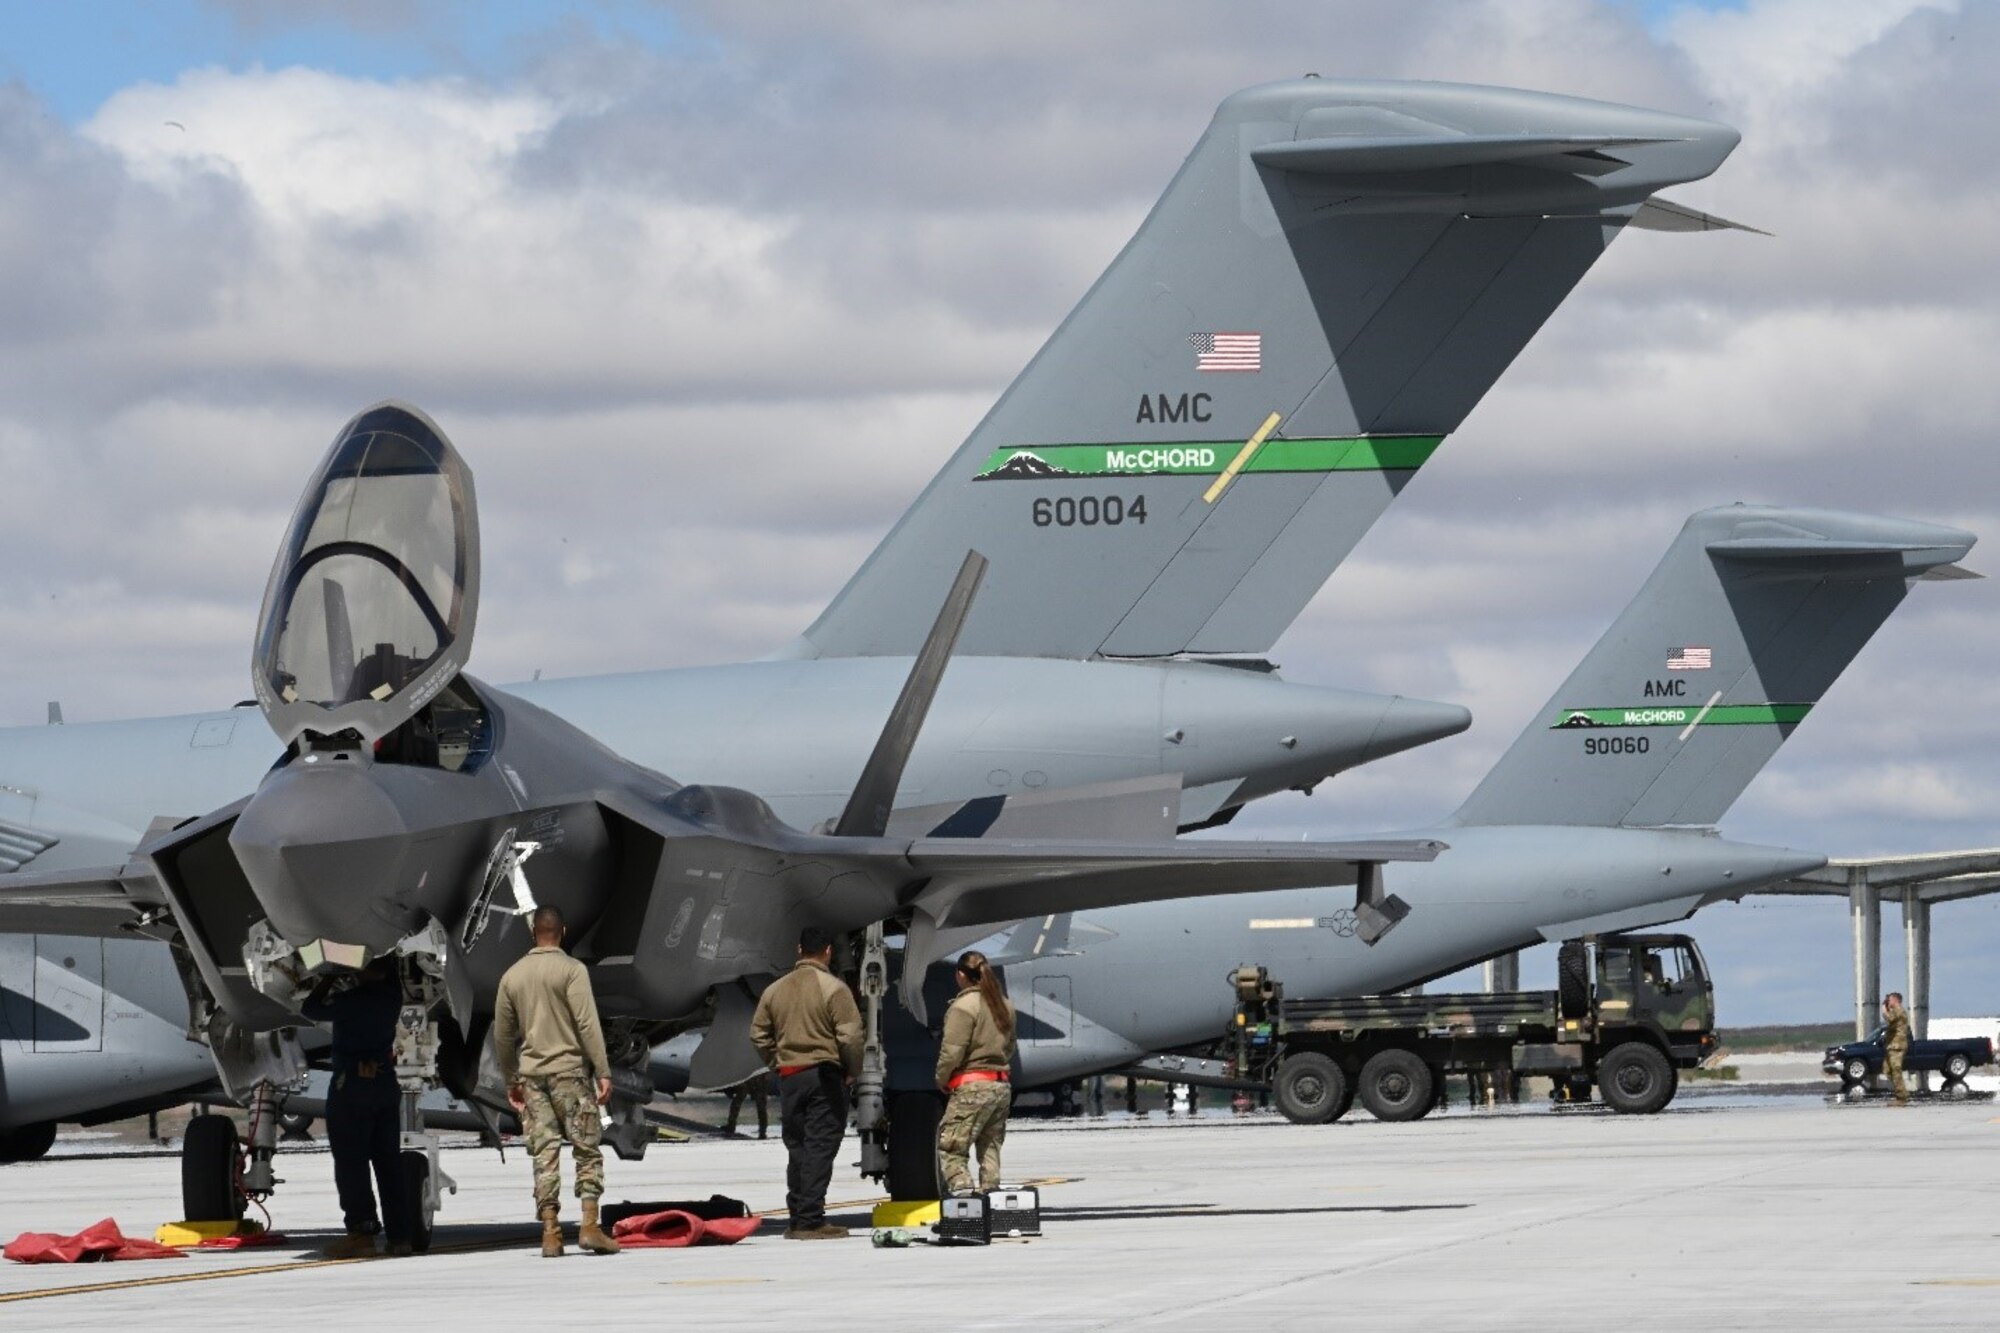 Airmen from Hill Air Force Base, Utah, observe an F-35 Lightning II April 26, 2021, on the flight line at Mountain Home AFB, Idaho. Airmen across the western United States participated in exercise Rainier War, testing their abilities to employ air combat capabilities during a time of potentially imminent foreign aggression.